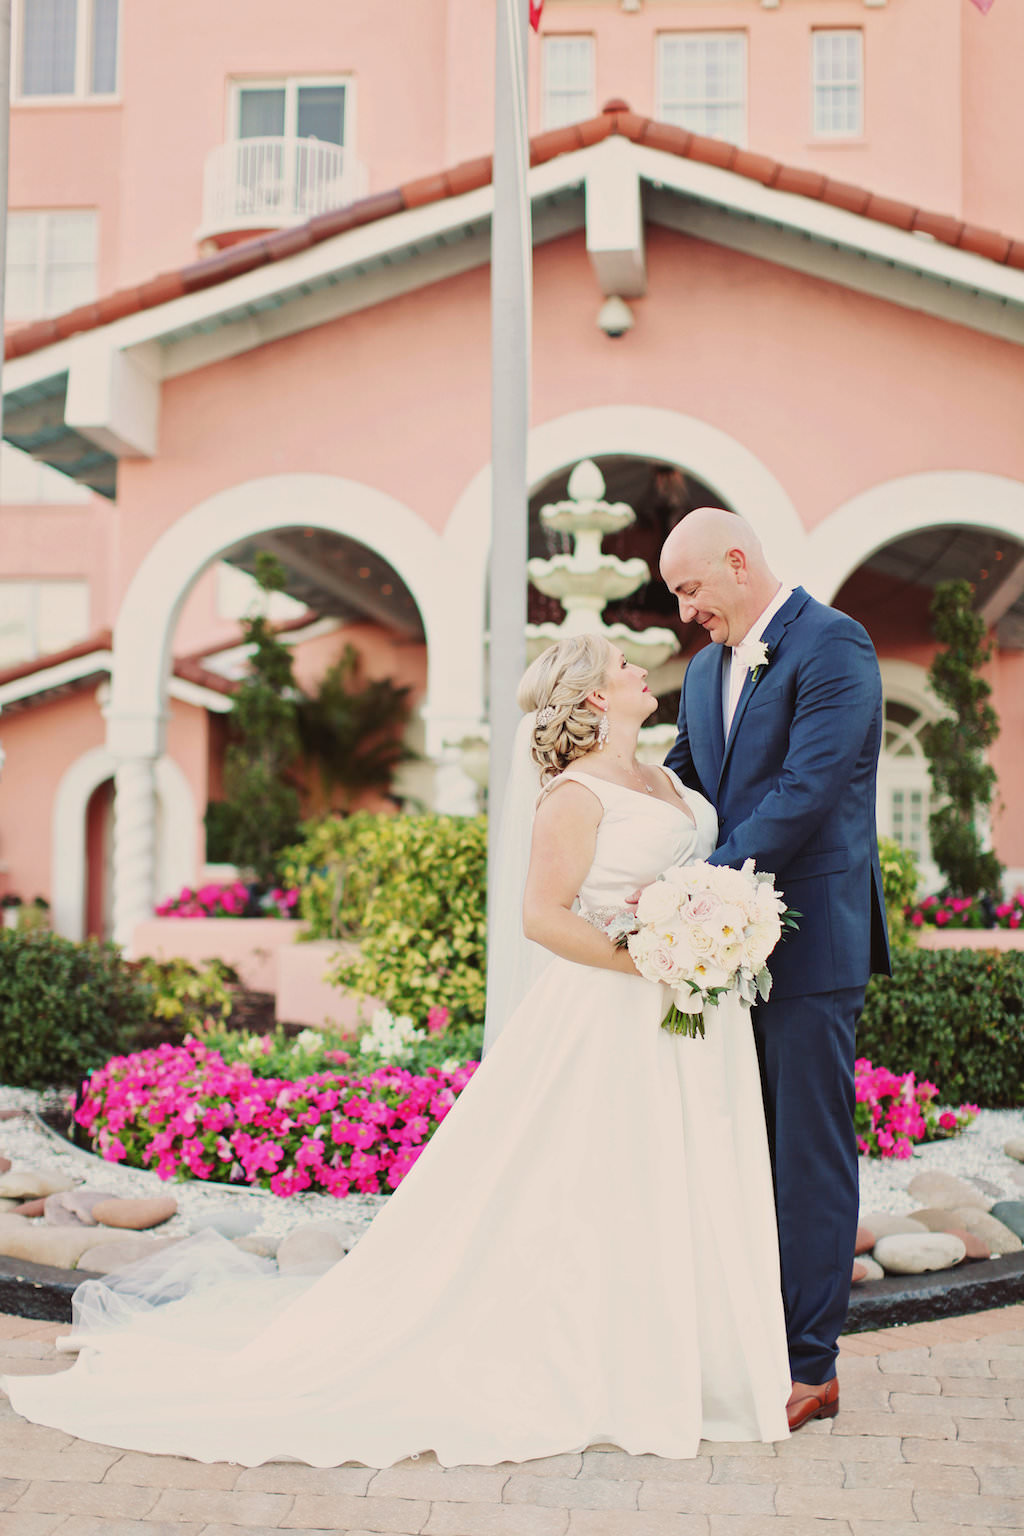 Bride and Groom Outdoor Wedding Portrait, Groom in Navy Blue Suit Bride with White Floral Bouquet | St Pete Beach Wedding Venue The Don CeSar